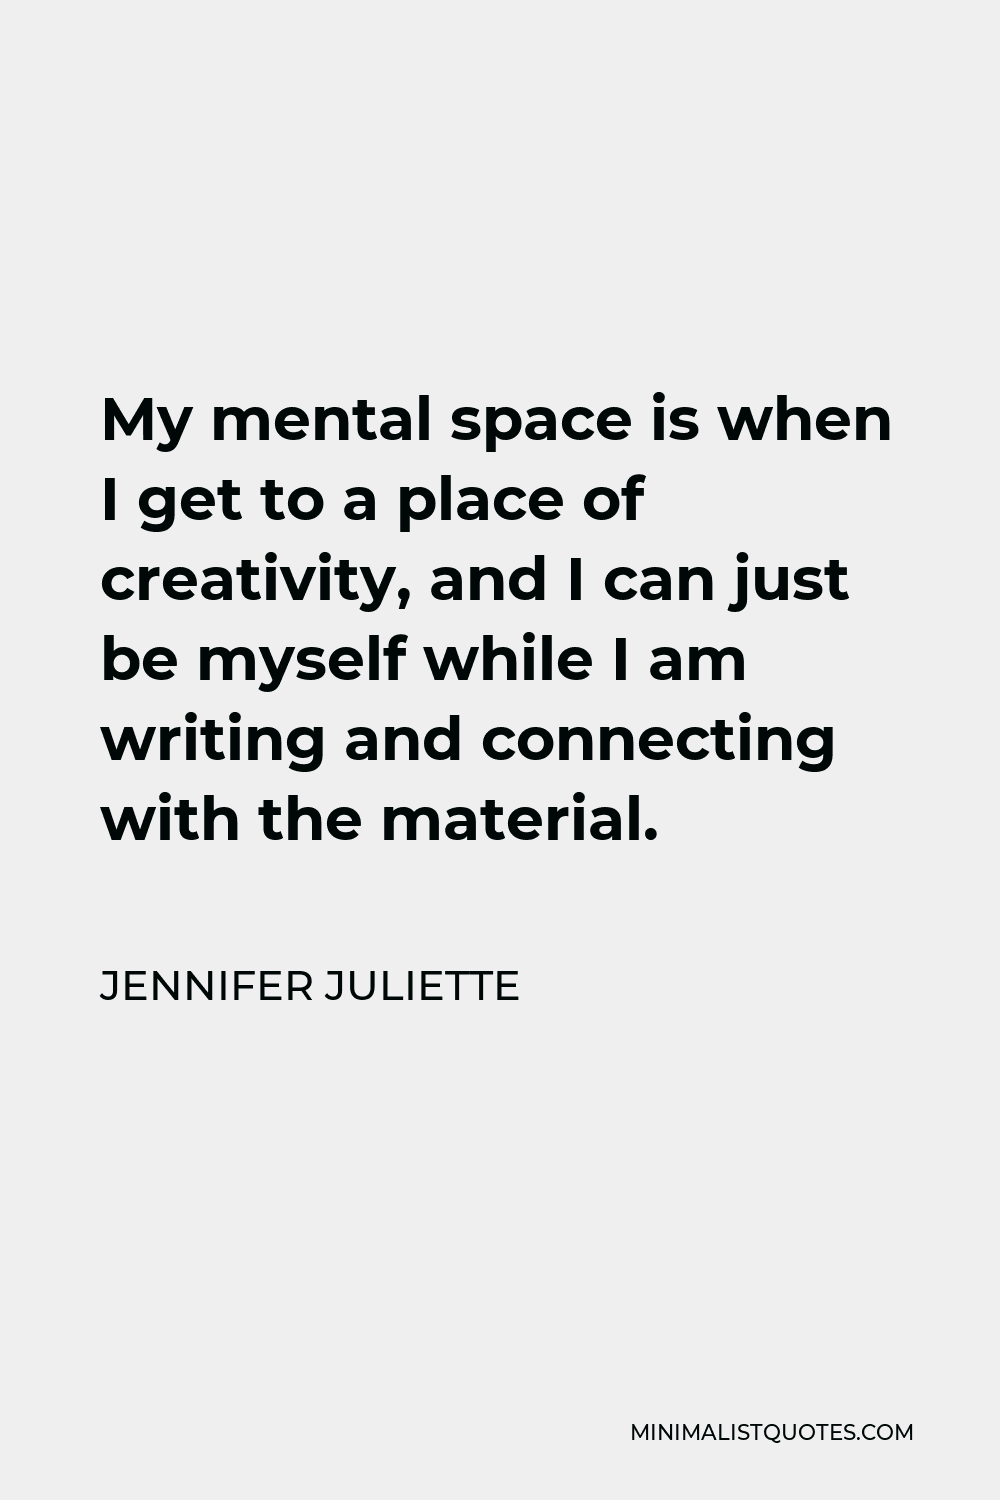 Jennifer Juliette Quote - My mental space is when I get to a place of creativity, and I can just be myself while I am writing and connecting with the material.